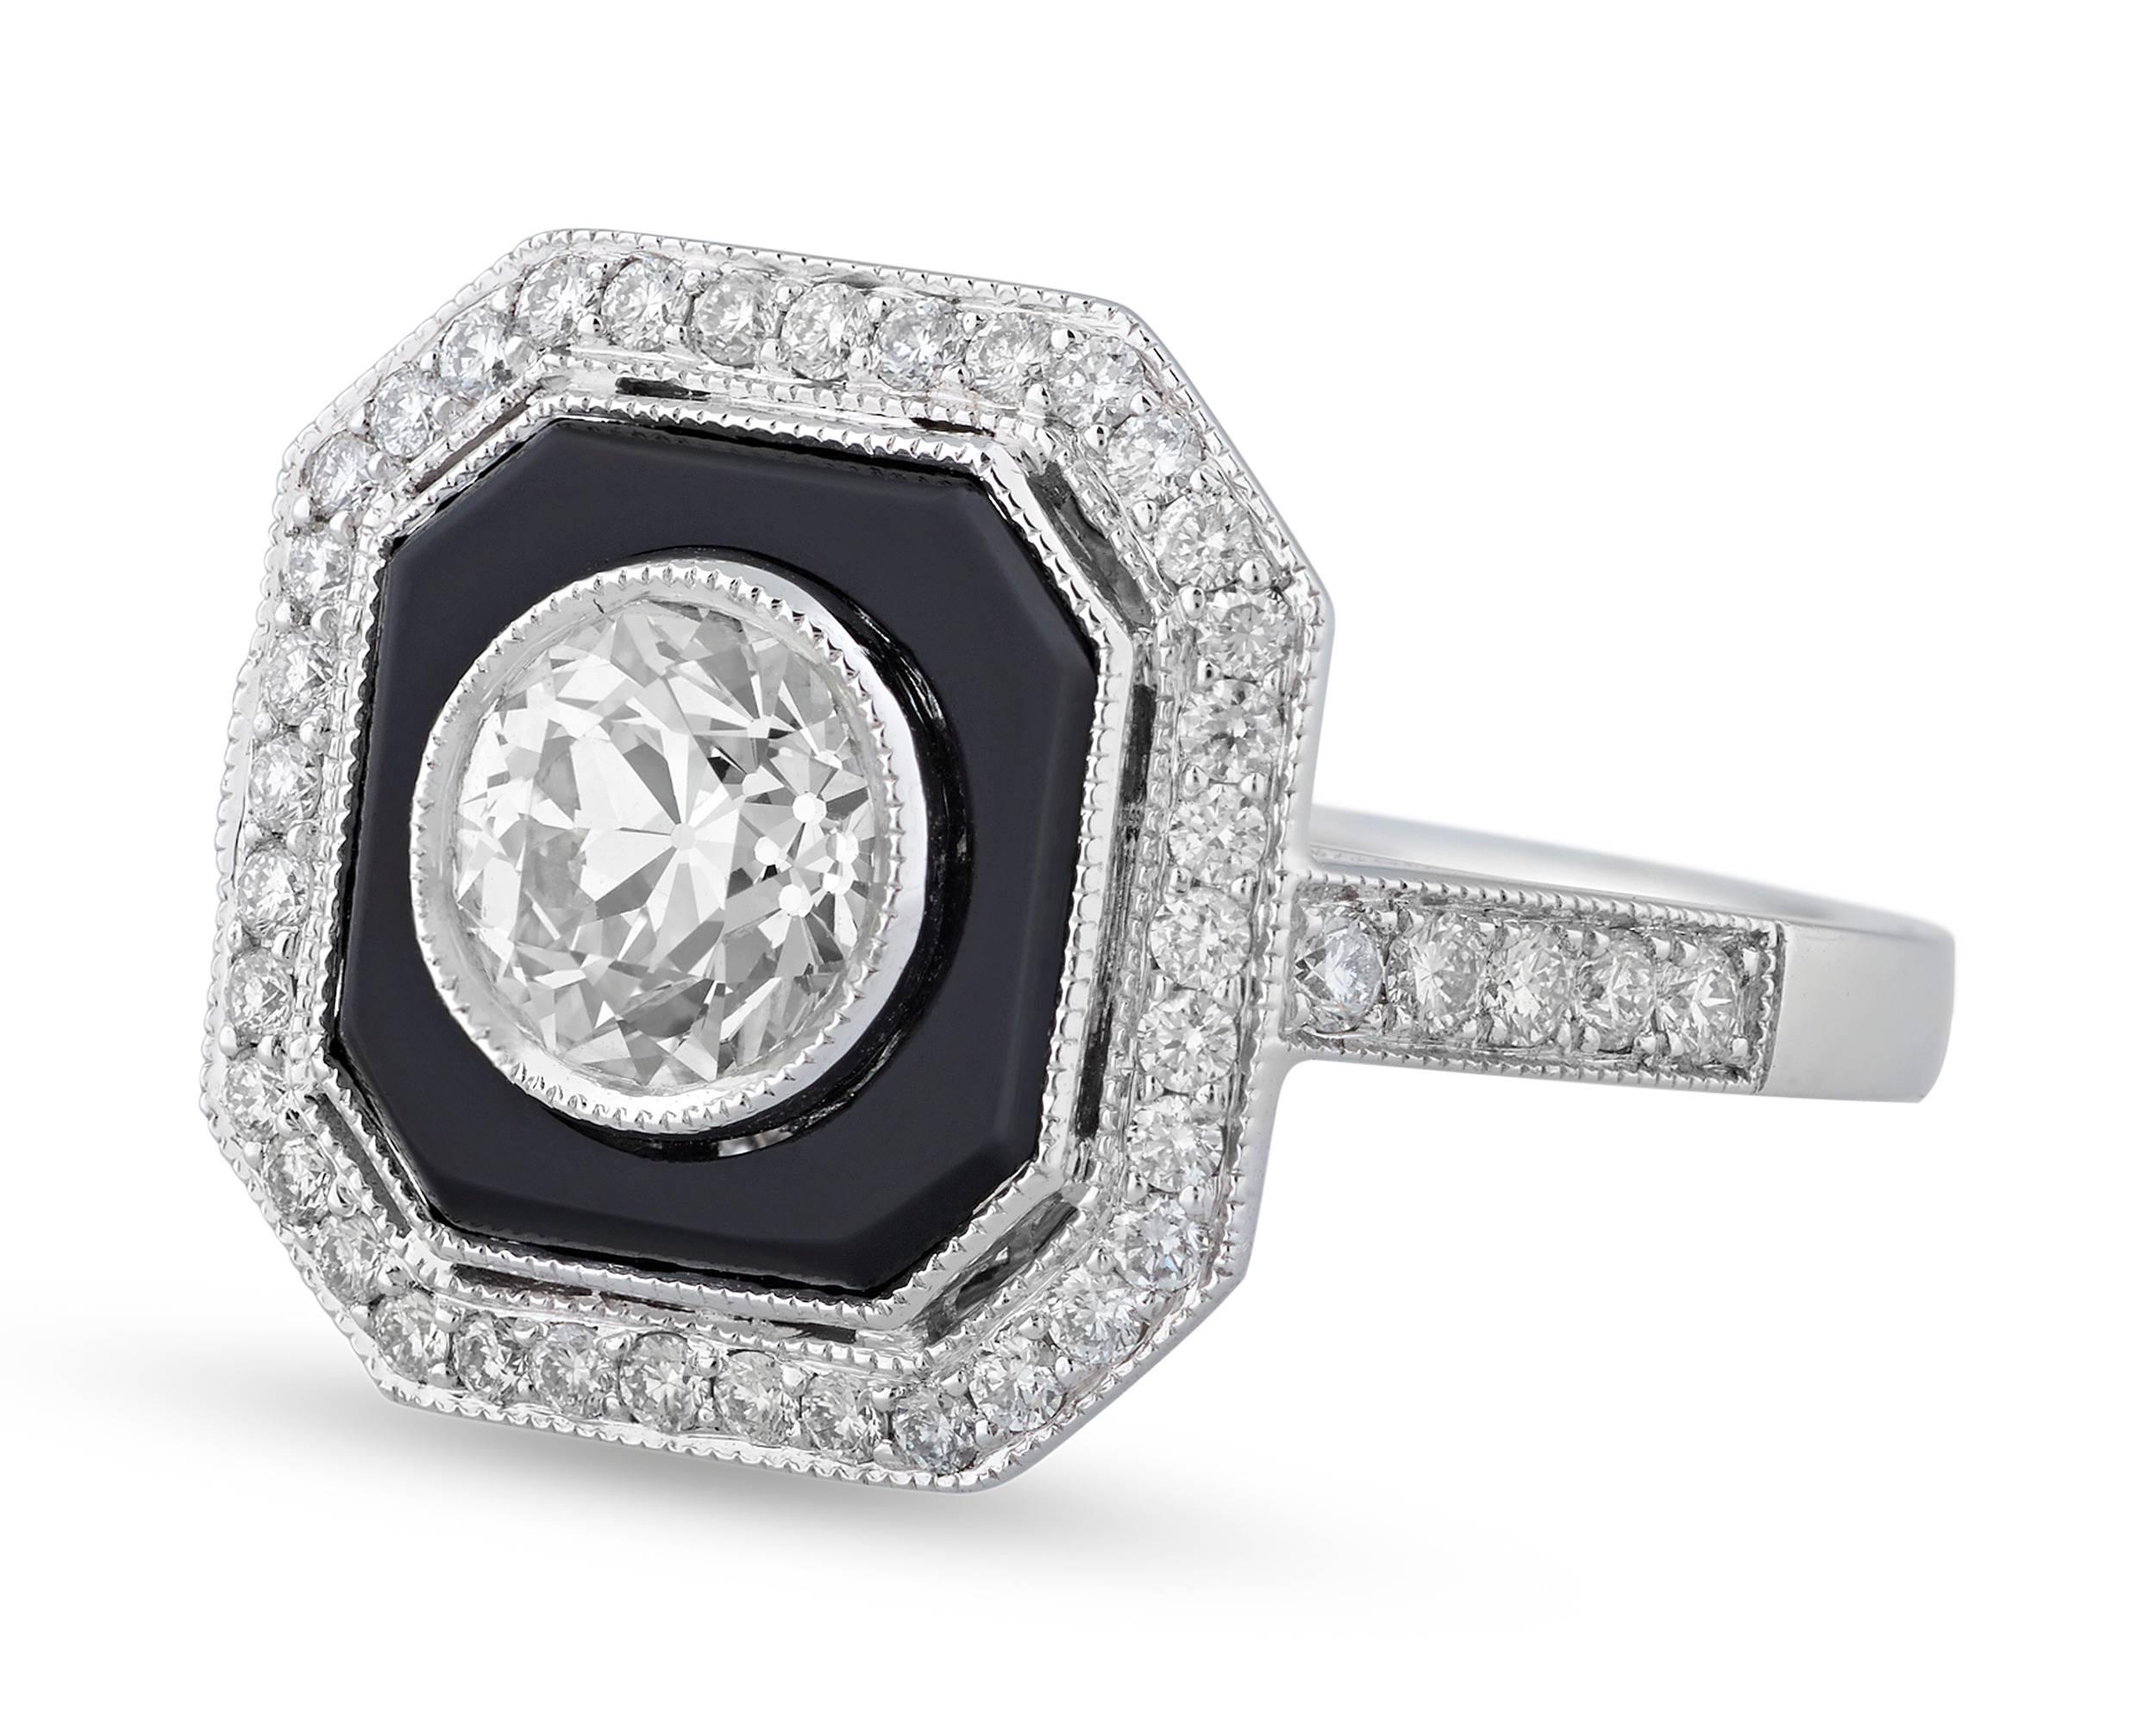 The timeless style of the Jazz Age comes to life in this eye-catching Art Deco-style ring. Onyx totaling 0.39 carat surrounds the brilliant 0.88-carat round diamond at the ring’s center. Additional white diamonds add further sparkle to the geometric